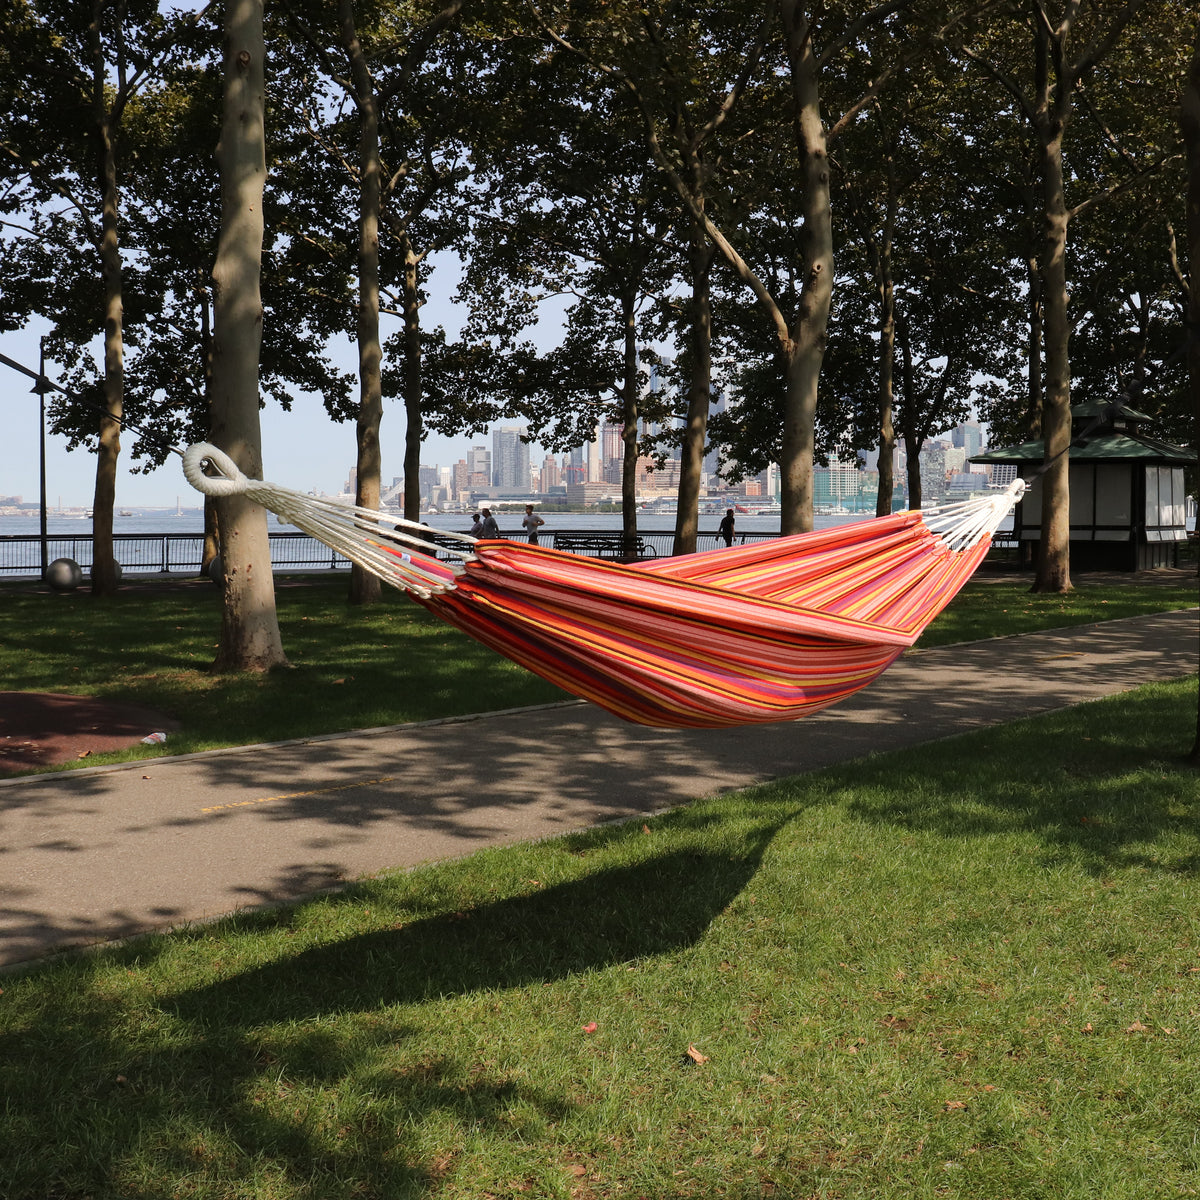 Bliss Hammocks 40-inch Wide Hammock in a Bag with Hand-woven Rope loops in the toasted almond variation hanging between two trees in a park.